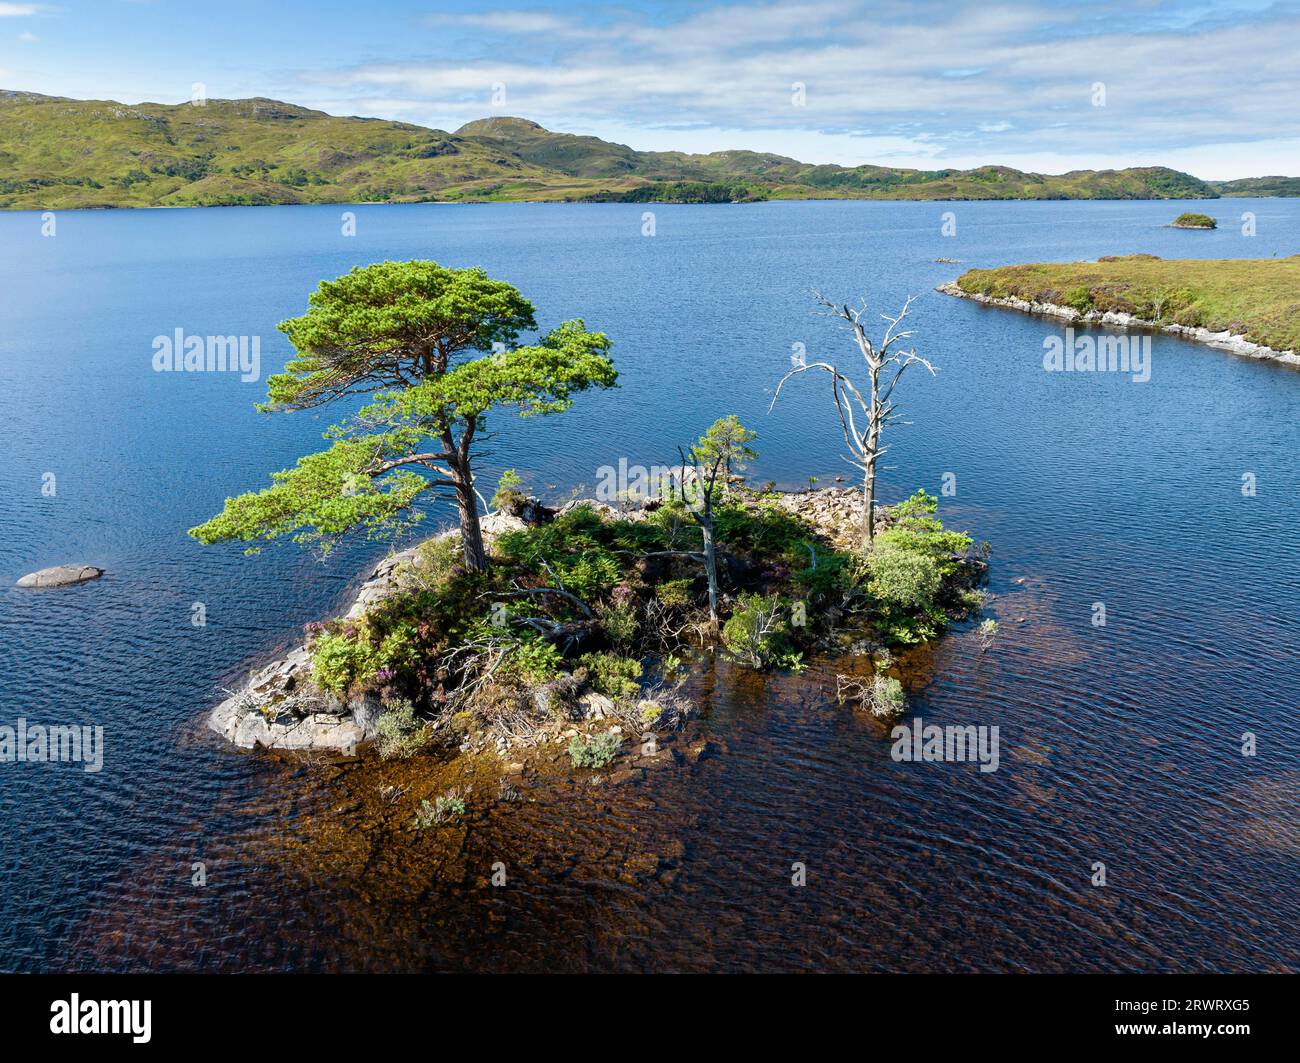 Aerial view of the freshwater loch Loch Assynt with a small island of trees, County Sutherland, Scotland, Great Britain Stock Photo